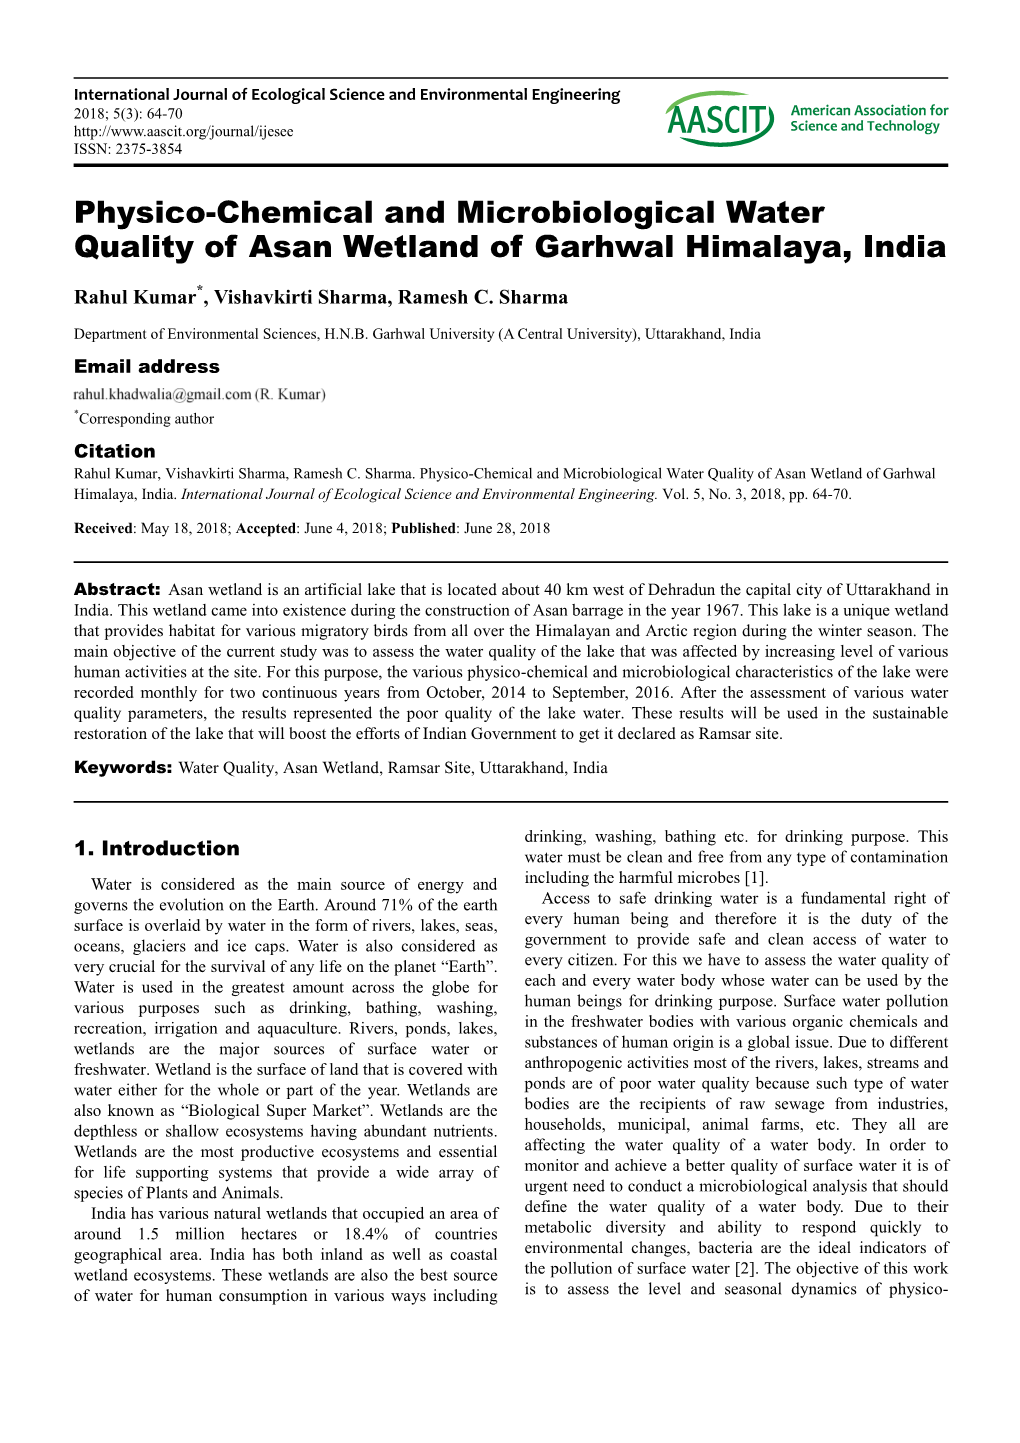 Physico-Chemical and Microbiological Water Quality of Asan Wetland of Garhwal Himalaya, India